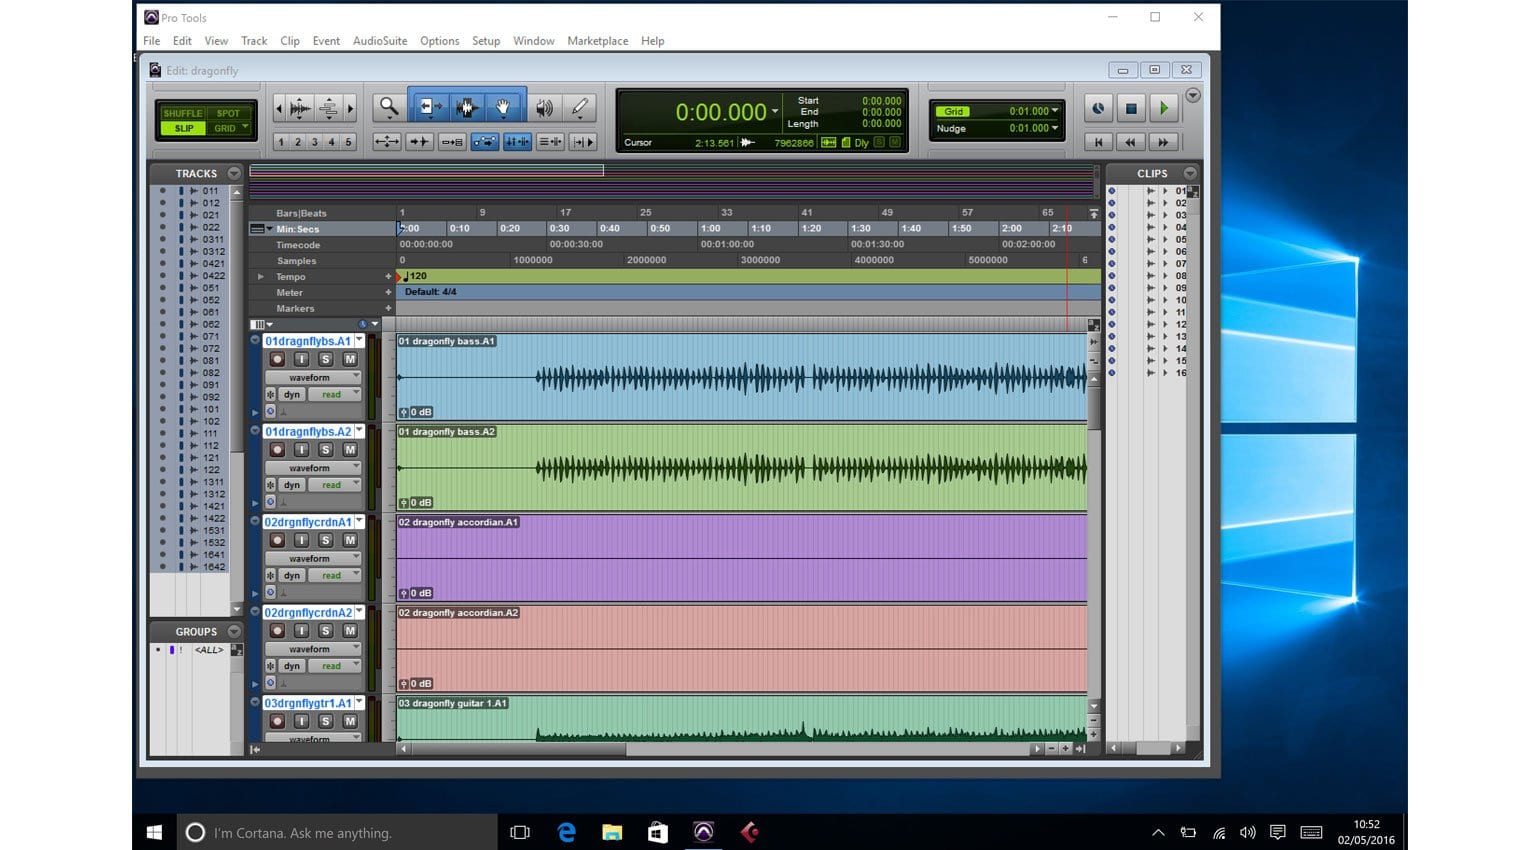 download pro tools first windows